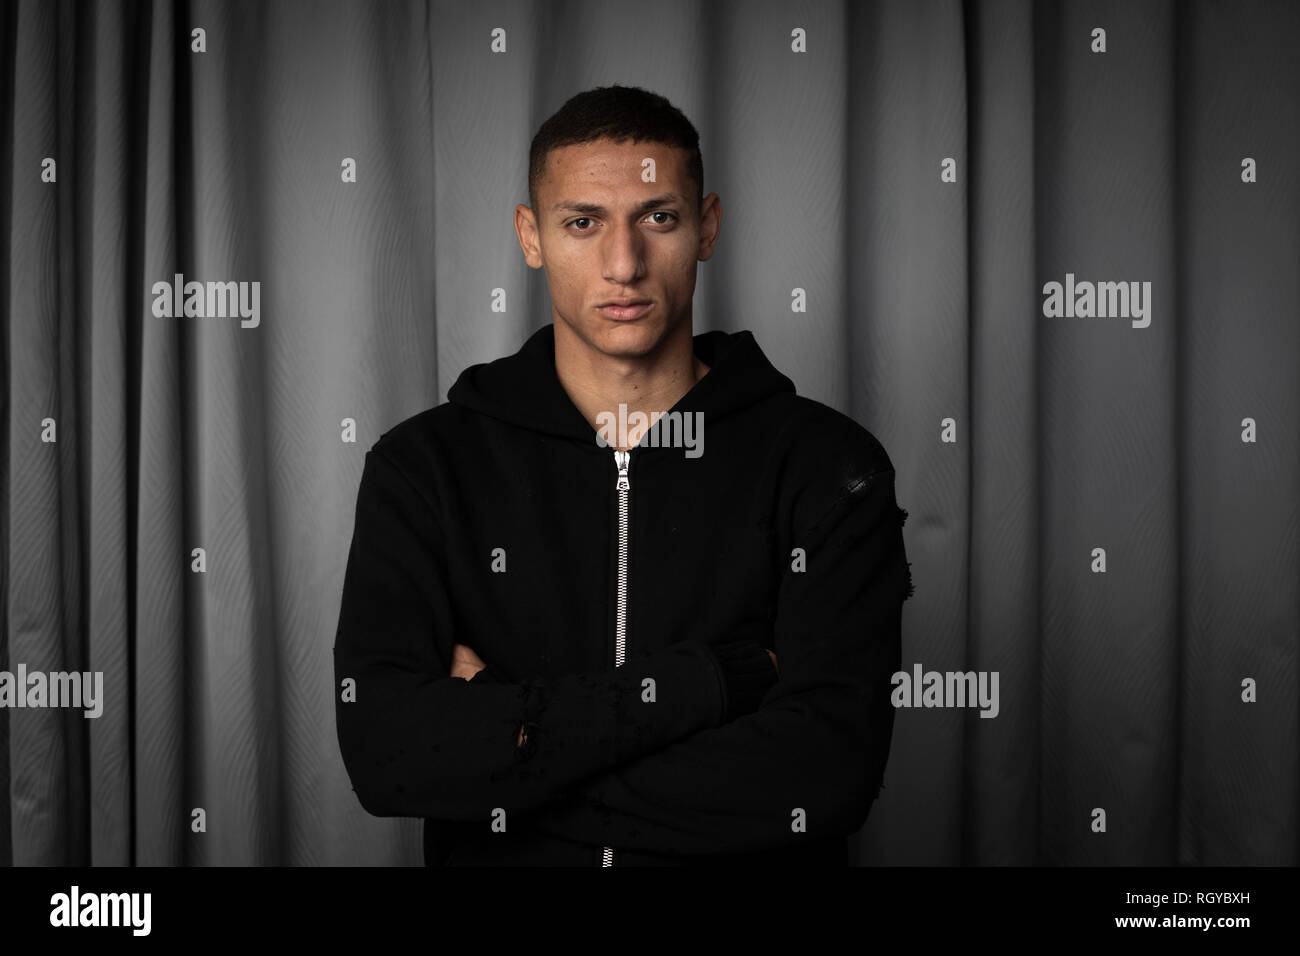 Everton footballer Richarlison, pictured at his home on Merseyside, which he shares with his agent Renato Velasco. The Brazilian forward joined Everton from Watford in 2018 and has already made his debut for the Brazil national team. He was due to play in his first Merseyside derby against Liverpool in three days time. Stock Photo